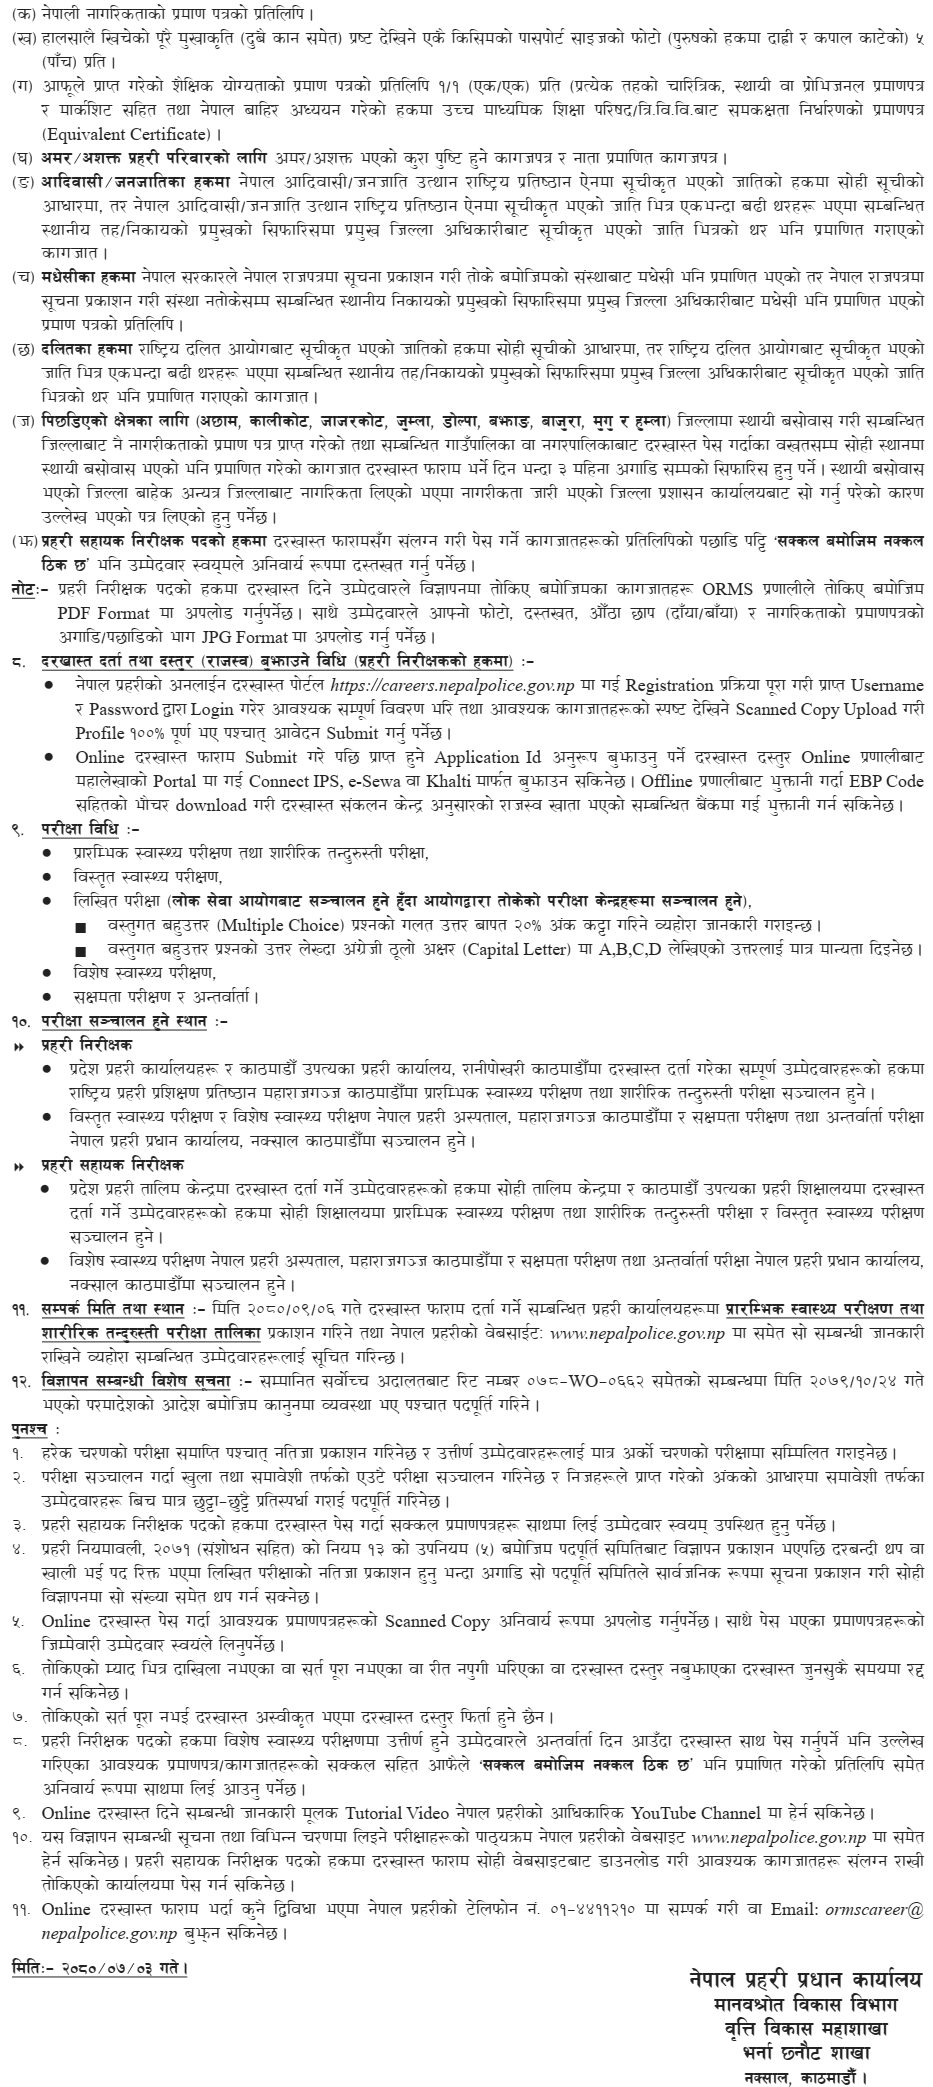 Nepal Police Job Vacancy for Inspector and ASI 2080